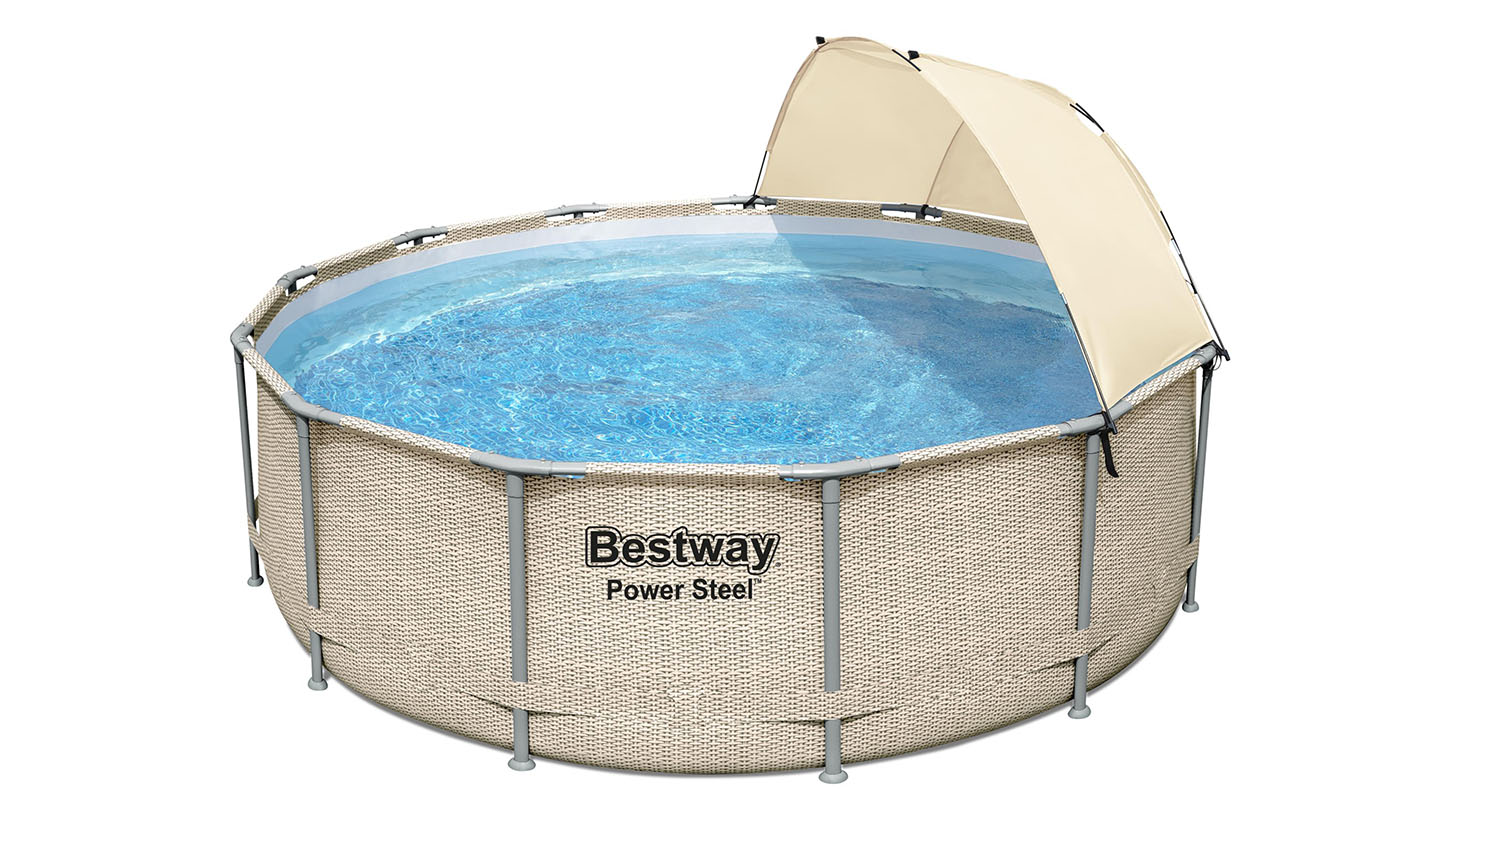 Bestway above ground pool for adults